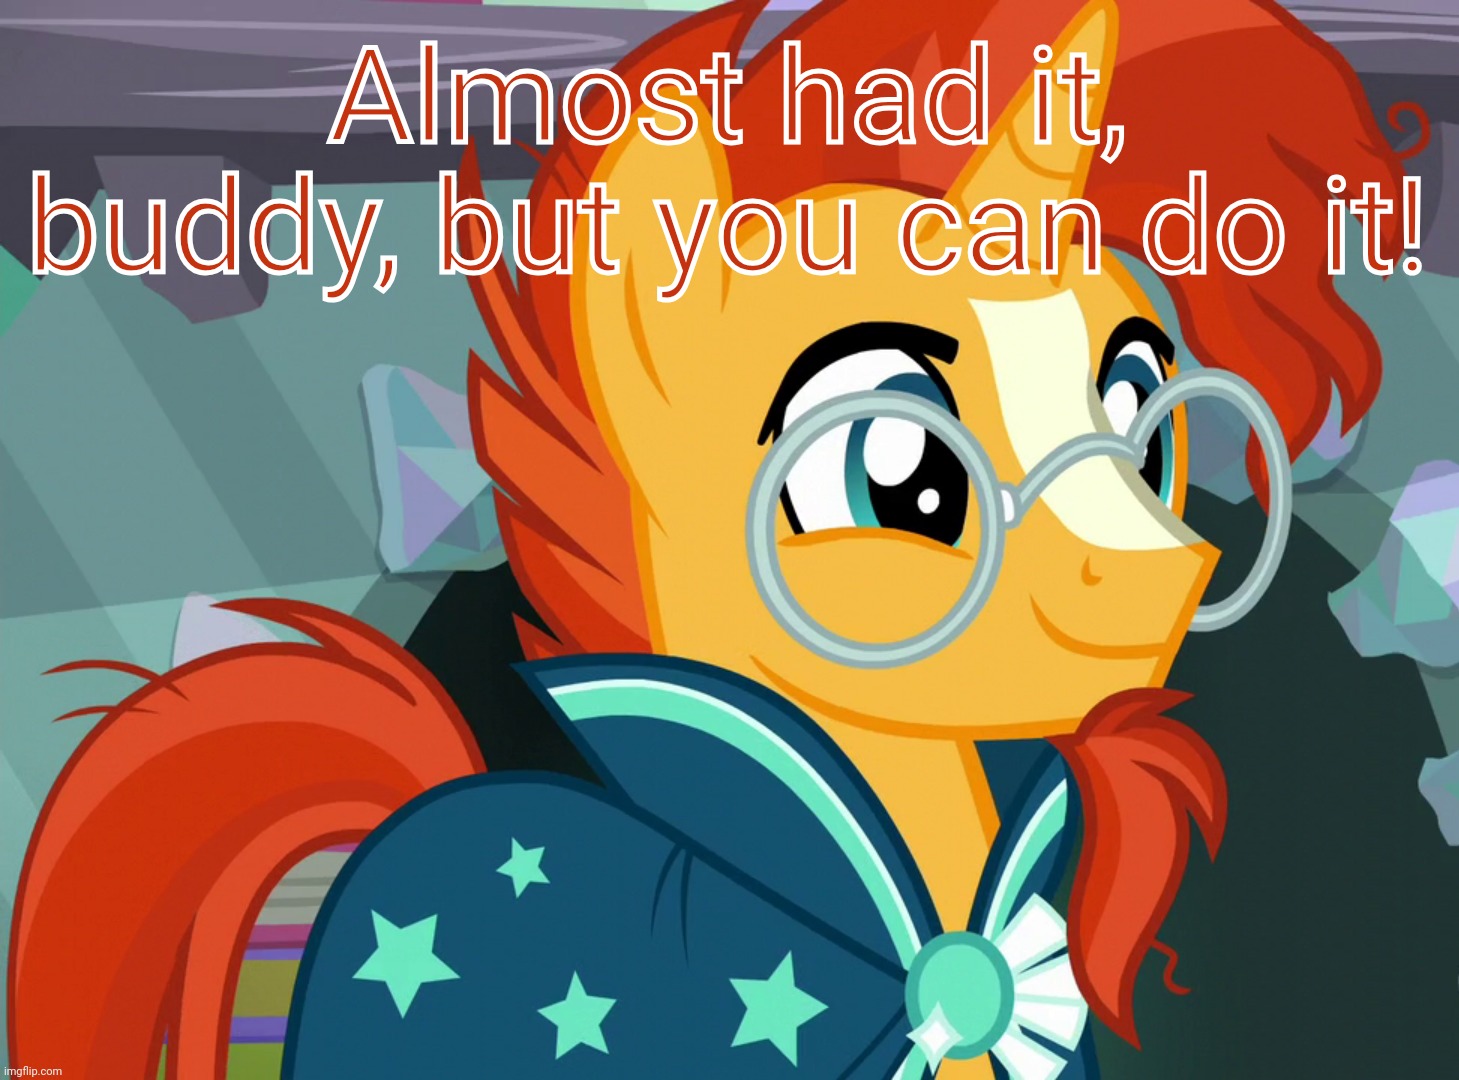 Happy Sunburst (MLP) | Almost had it, buddy, but you can do it! | image tagged in happy sunburst mlp | made w/ Imgflip meme maker